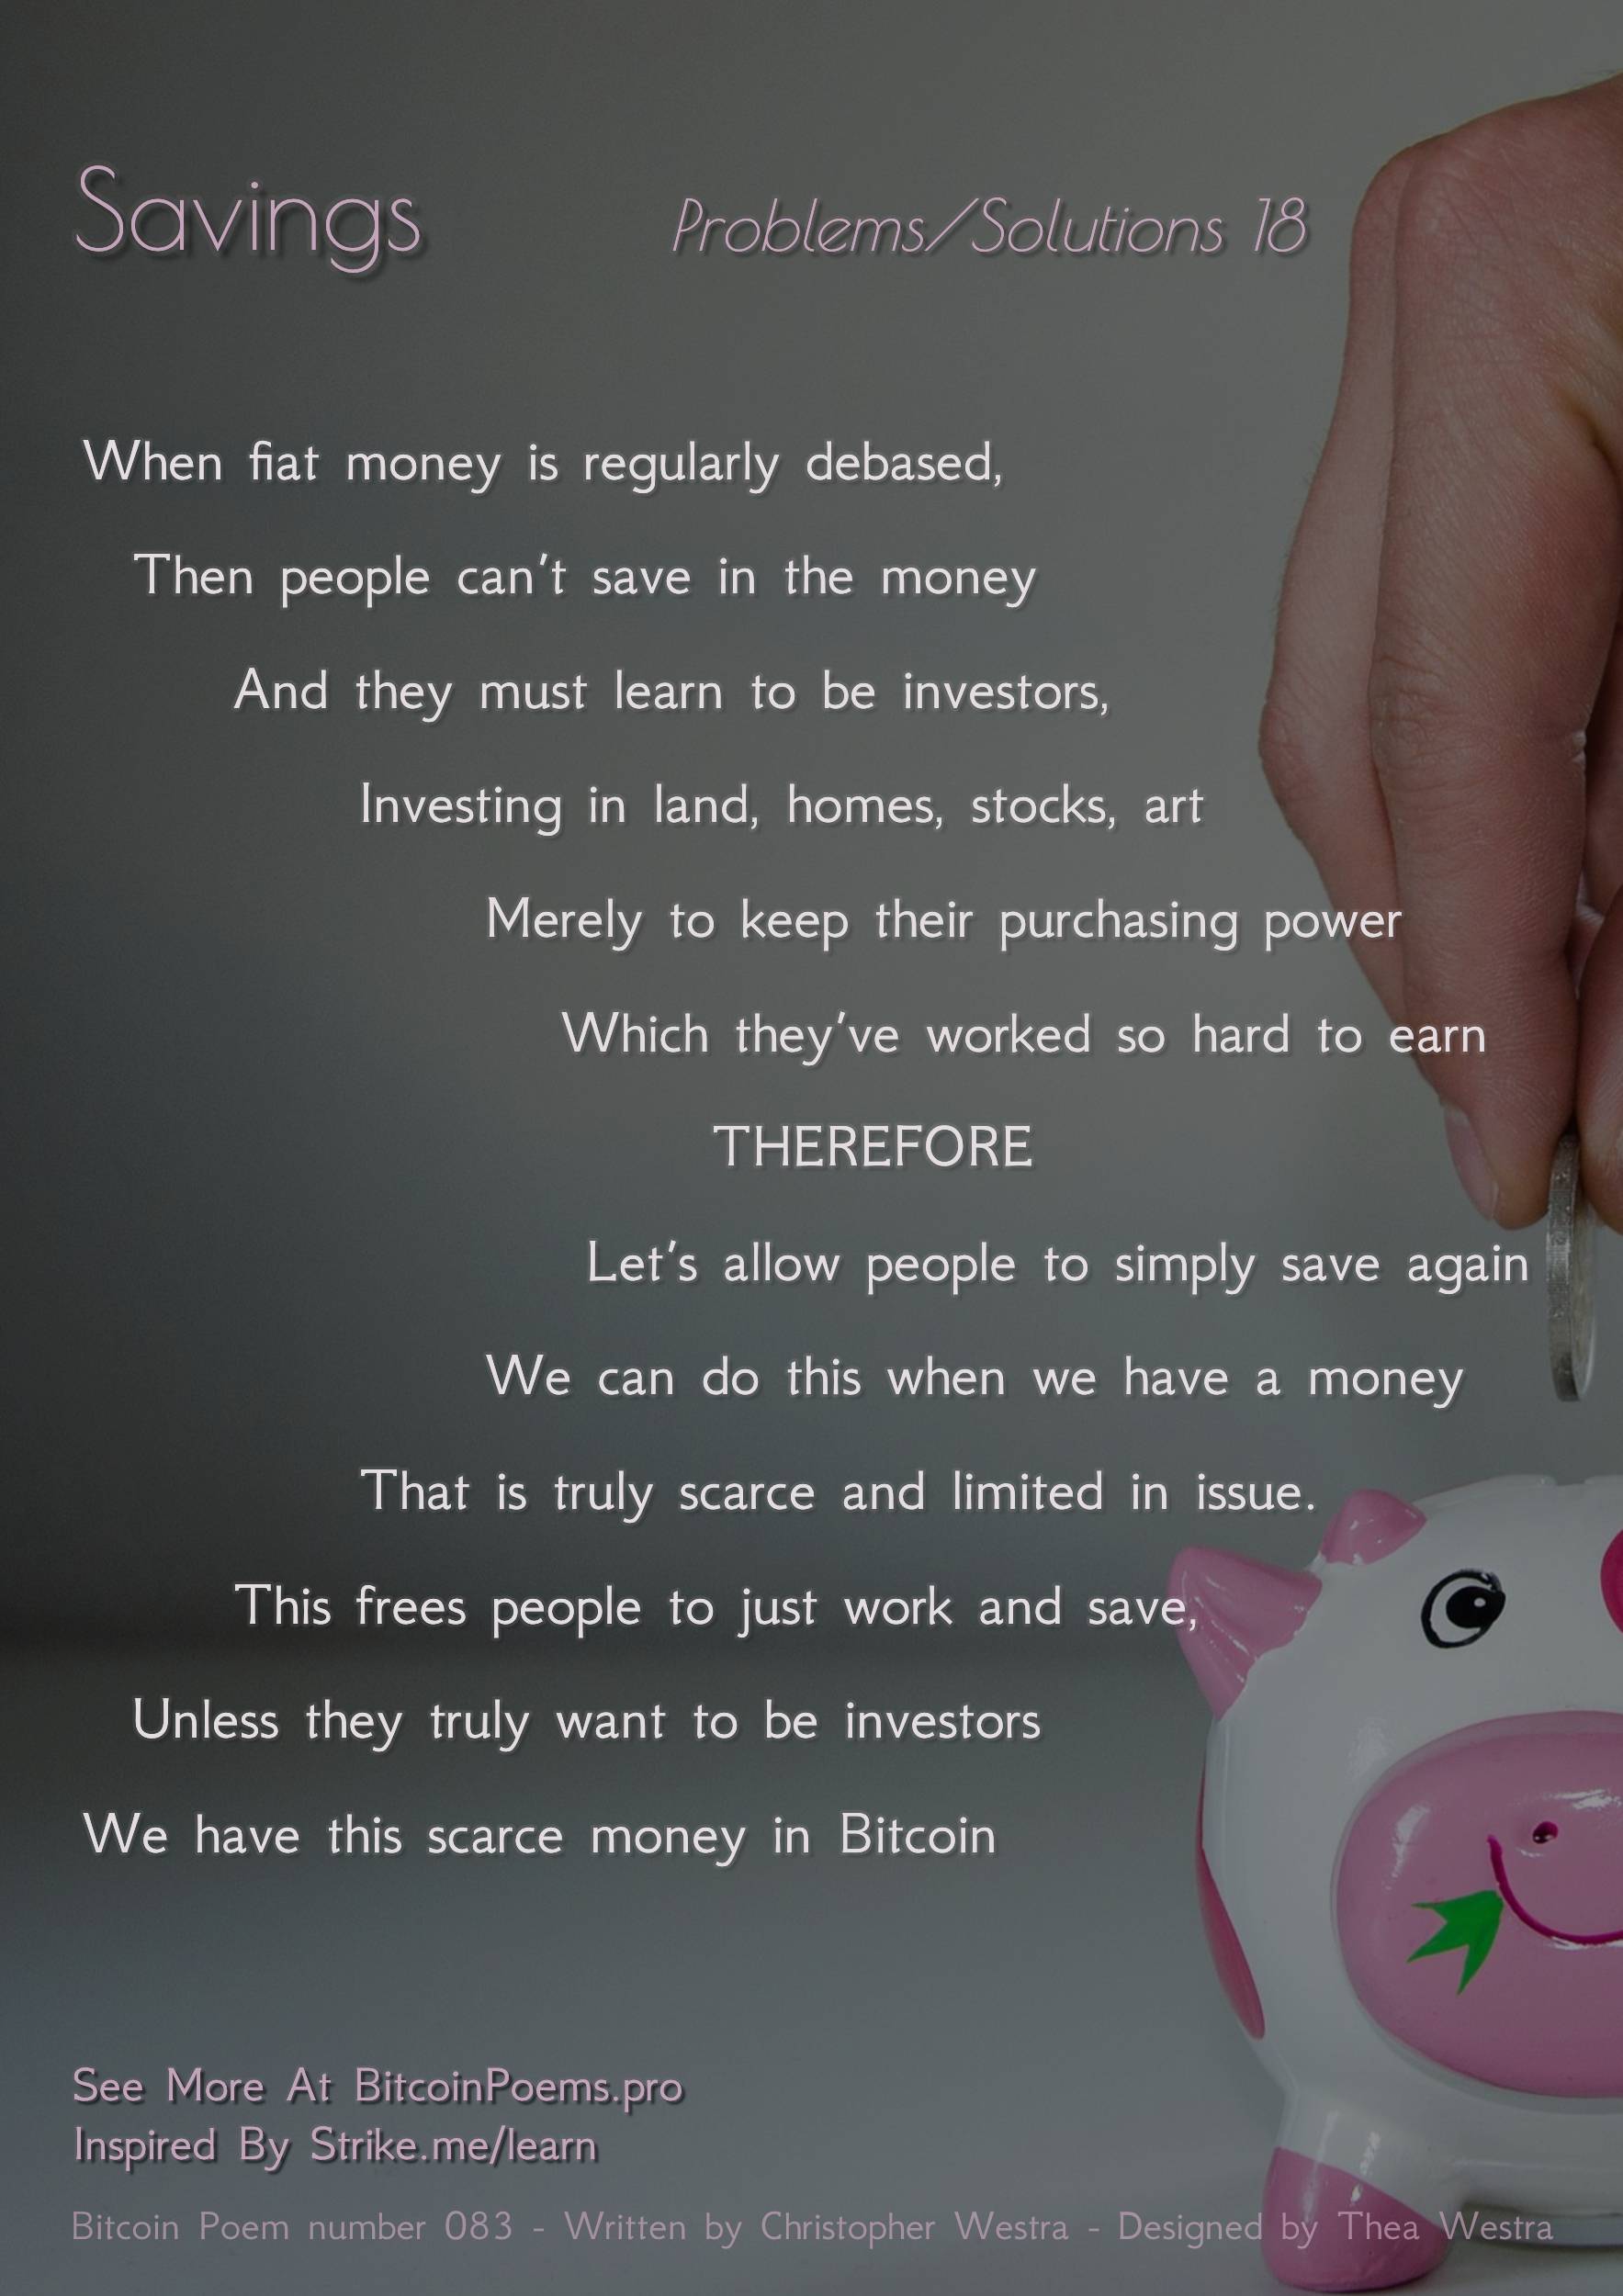 Savings - Bitcoin Poem 083 by Christopher Westra